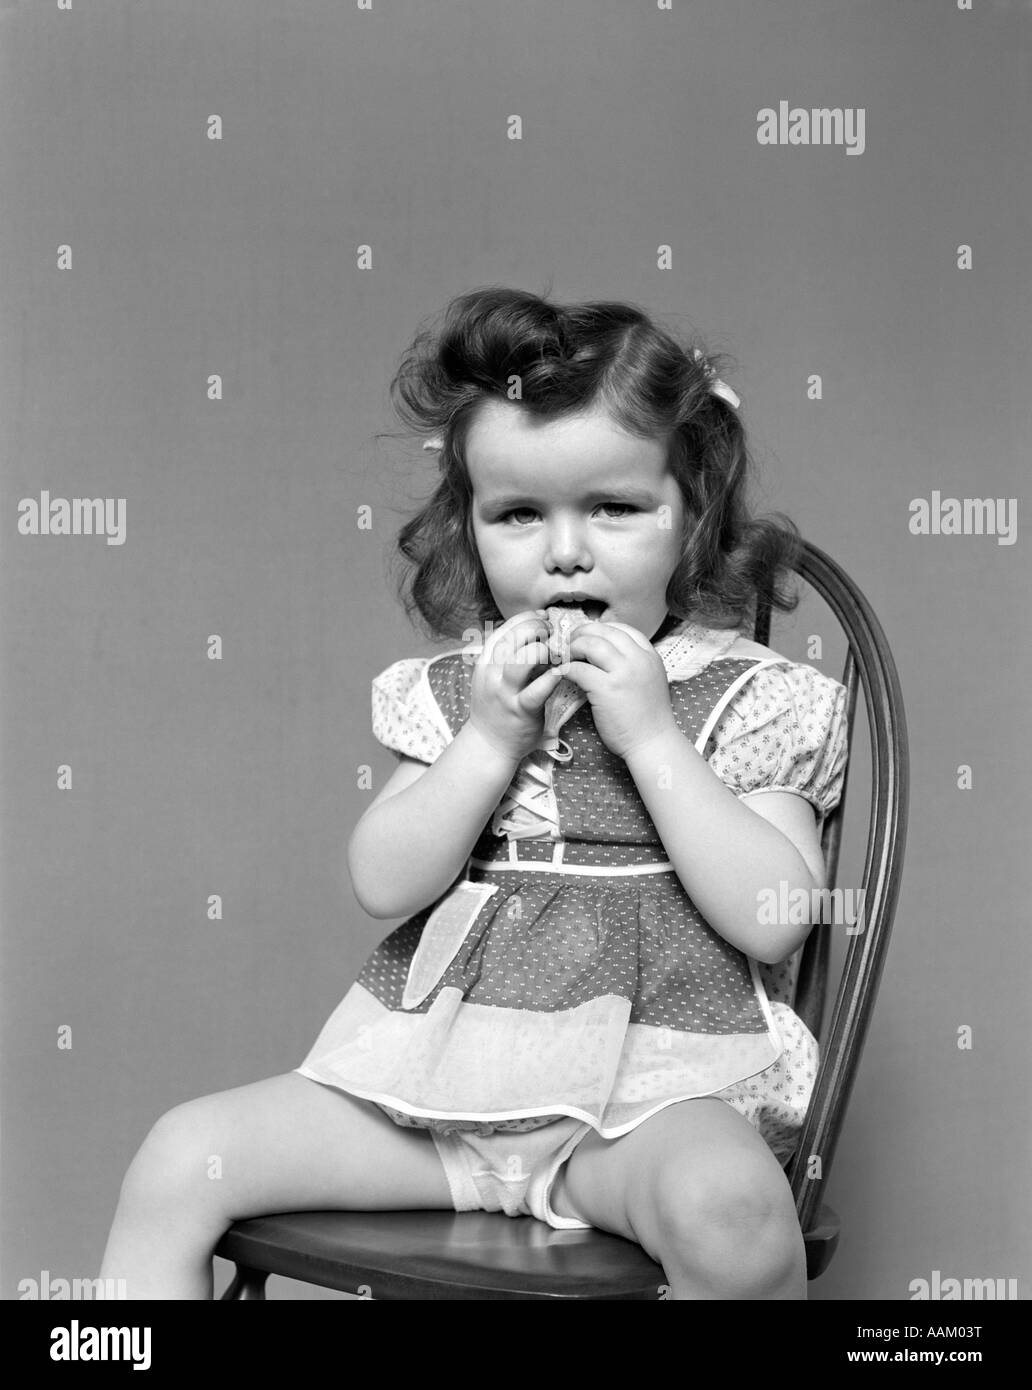 1930s TODDLER GIRL SIT IN WOODEN CHAIR POLKA DOT DRESS SHOWING UNDERPANTS EATING A COOKIE WITH BOTH HANDS VINTAGE Stock Photo